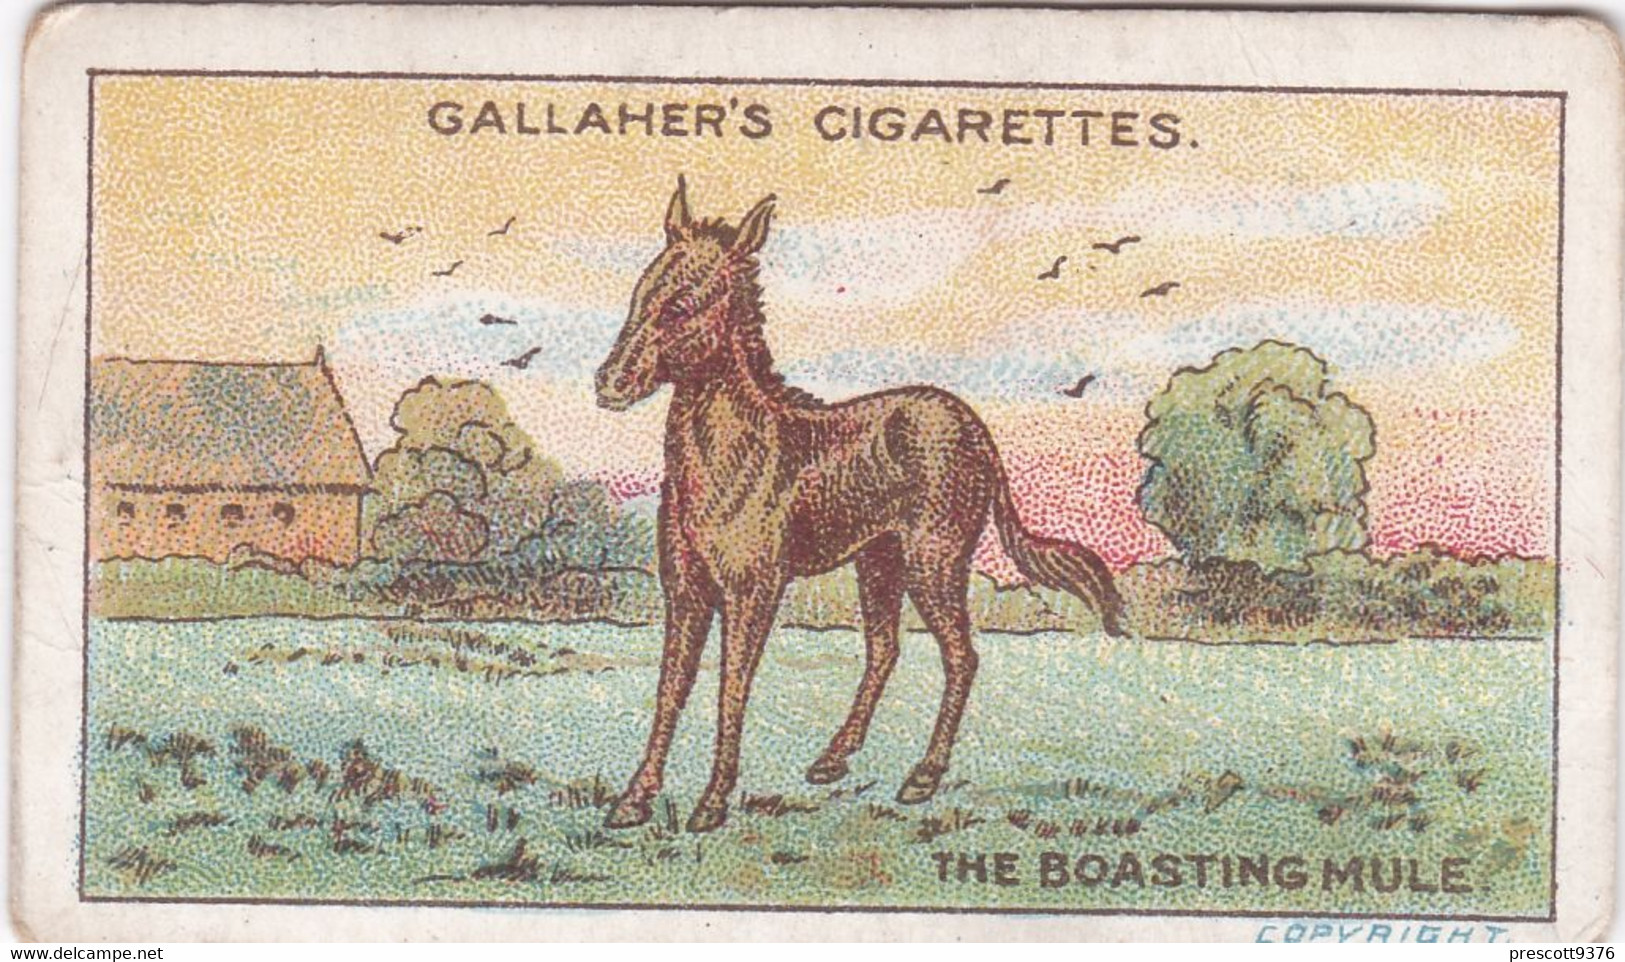 70 The Boasting Mule, Fables & Their Morals 1922  - Gallaher Cigarette Card - Original - Antique - Gallaher